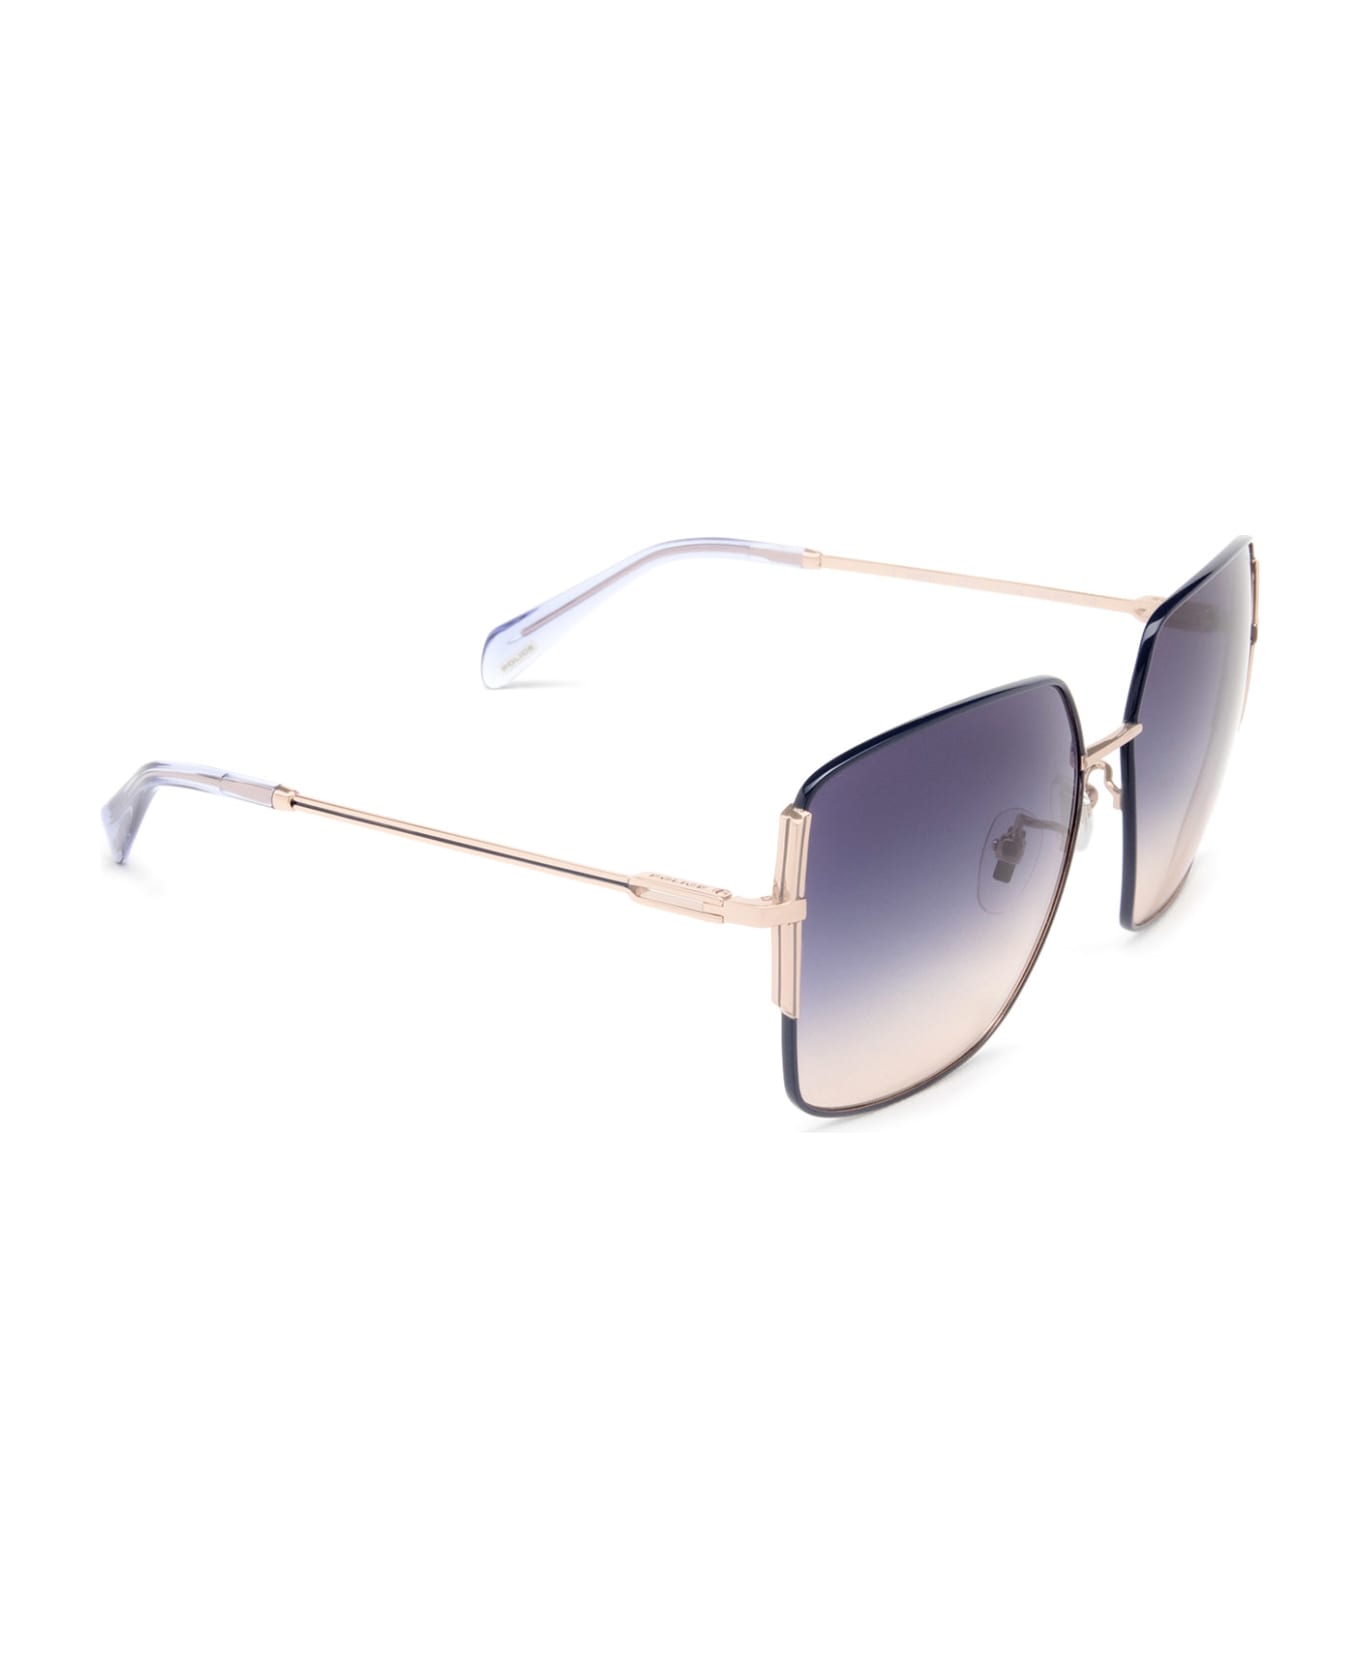 Police Splf34 Red Gold With Coloured Parts Sunglasses - Red Gold With Coloured Parts